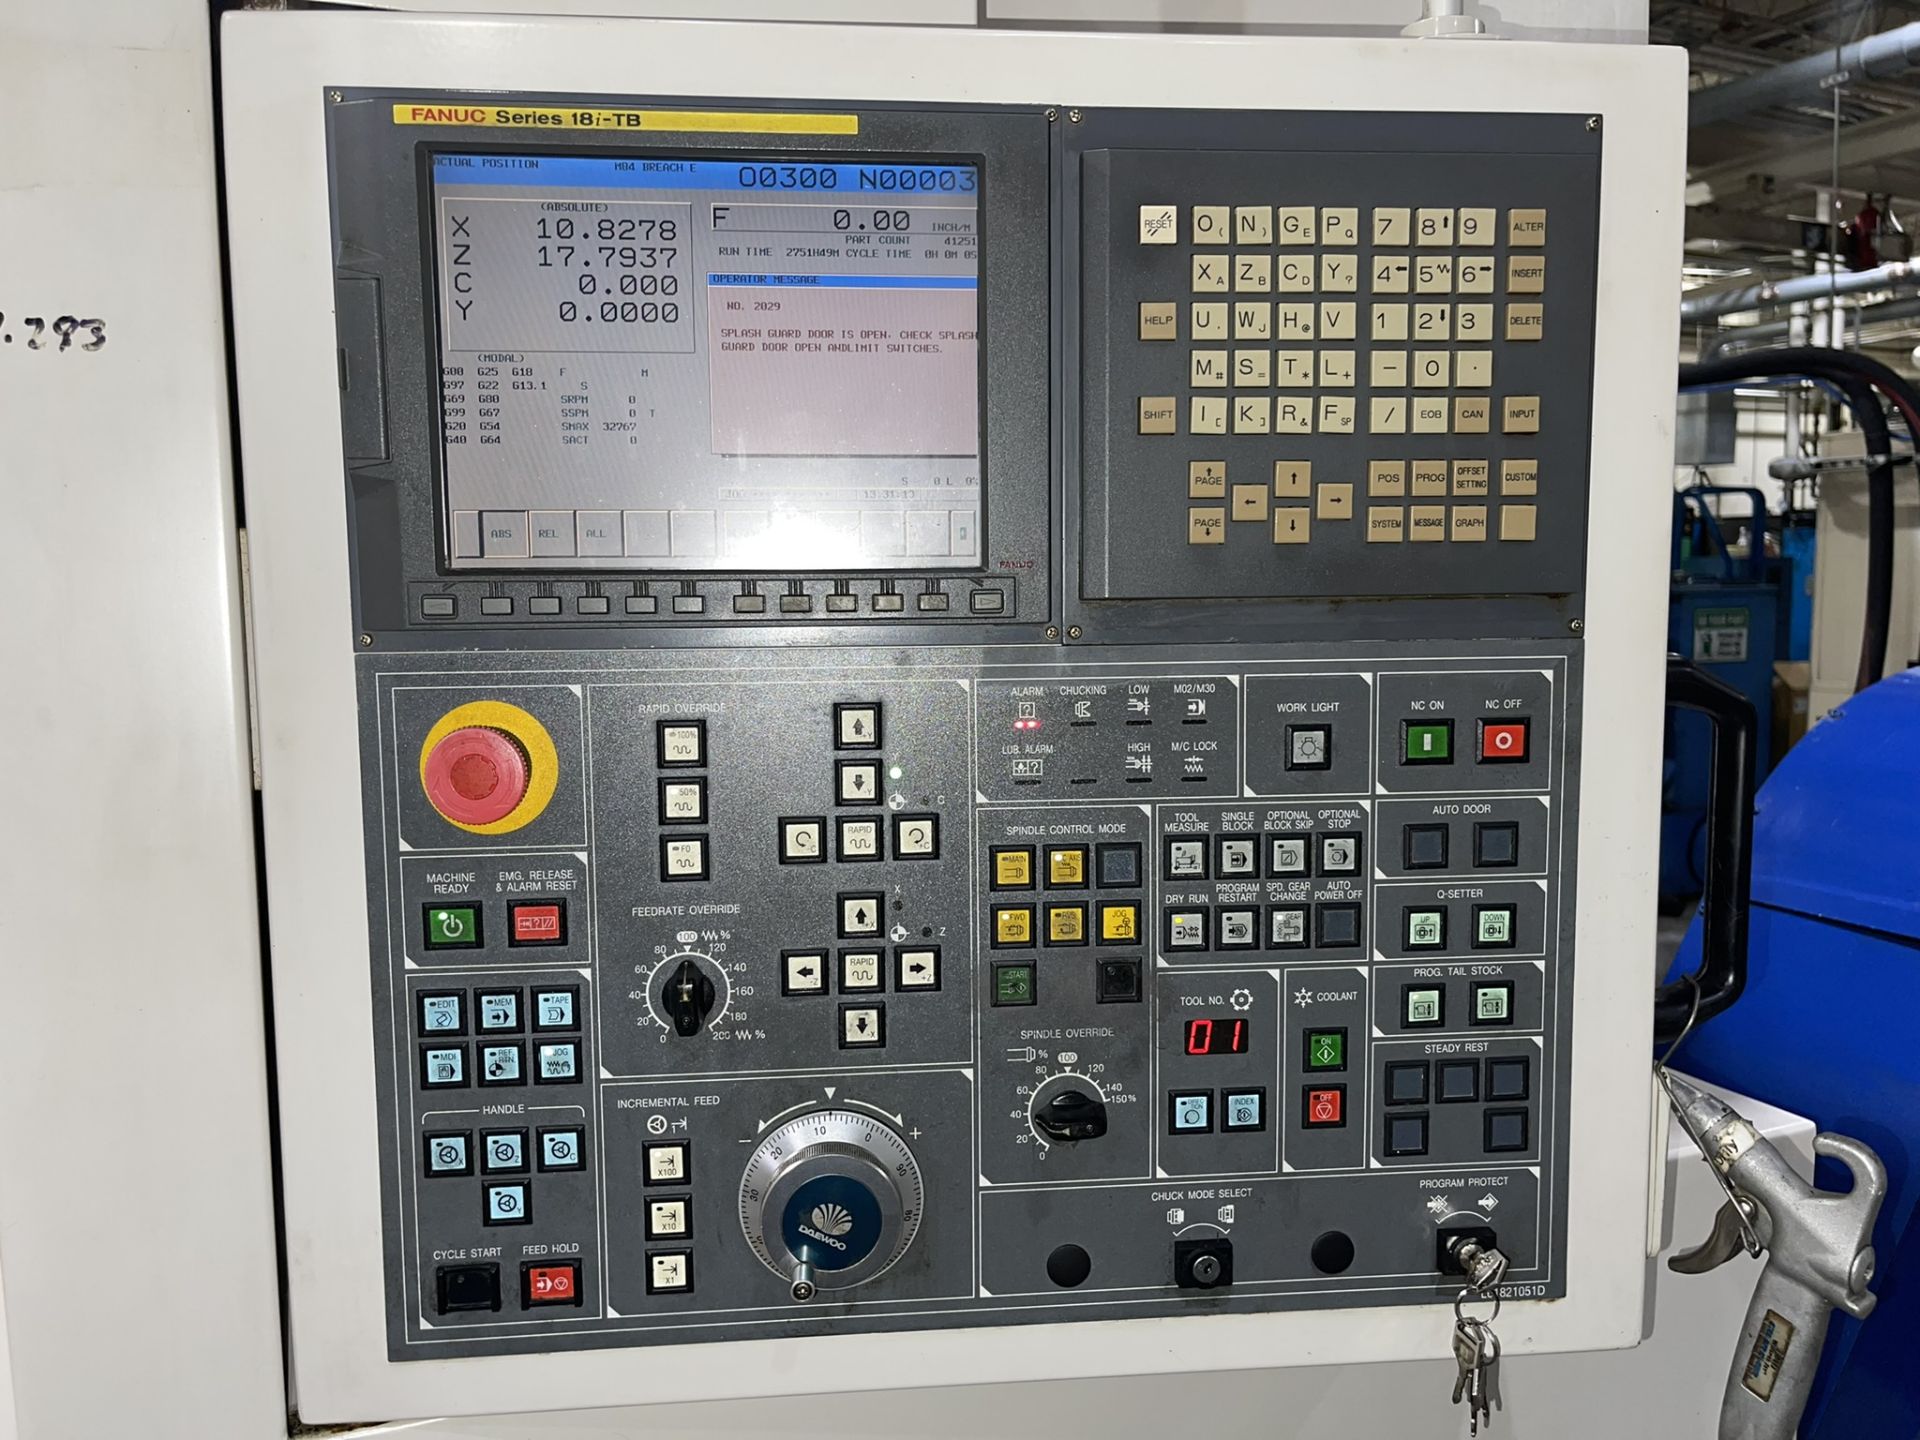 2004 Daewoo Puma 2500LY CNC Turning Center with Live Milling, S/N P250LY0372 - Image 2 of 7